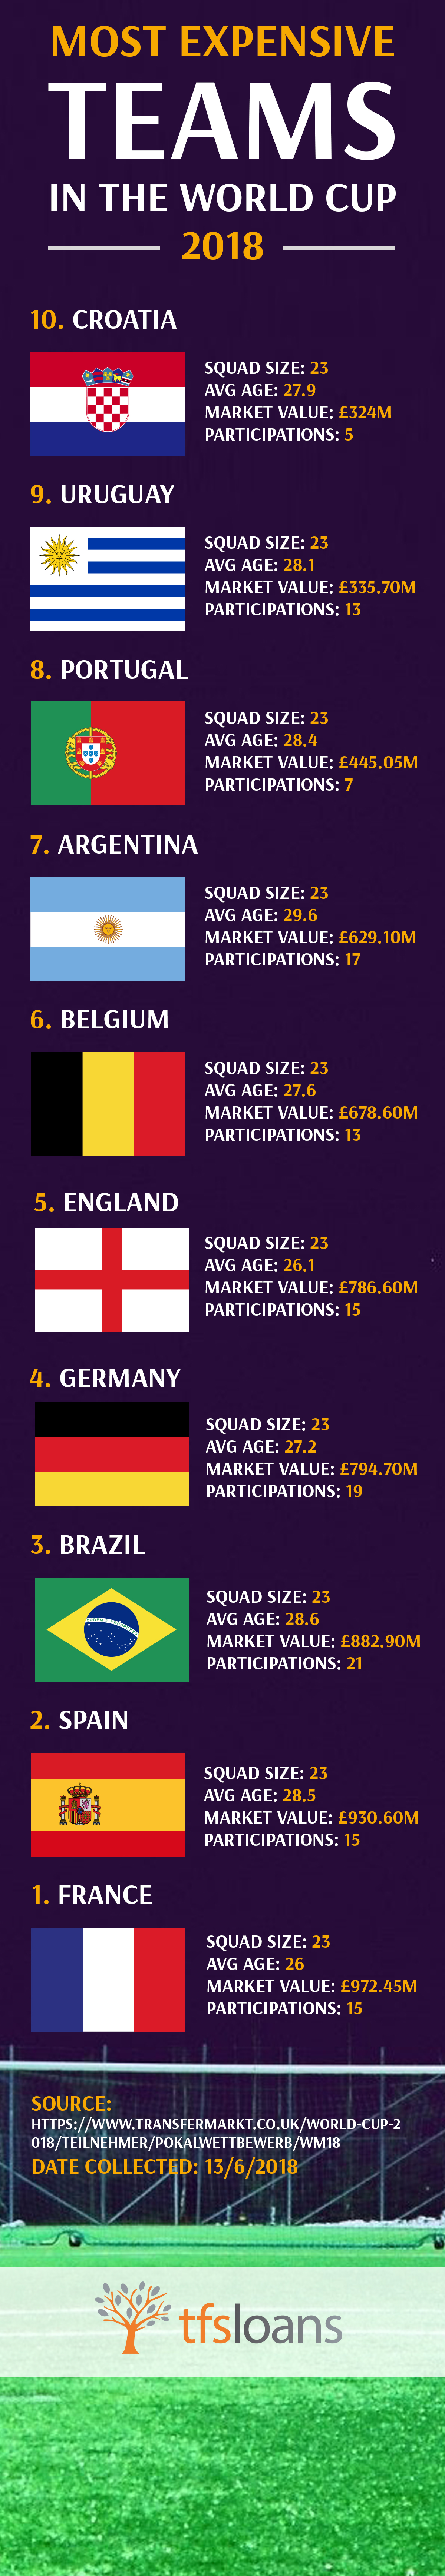 most expensive teams in the world cup 2018 infographic